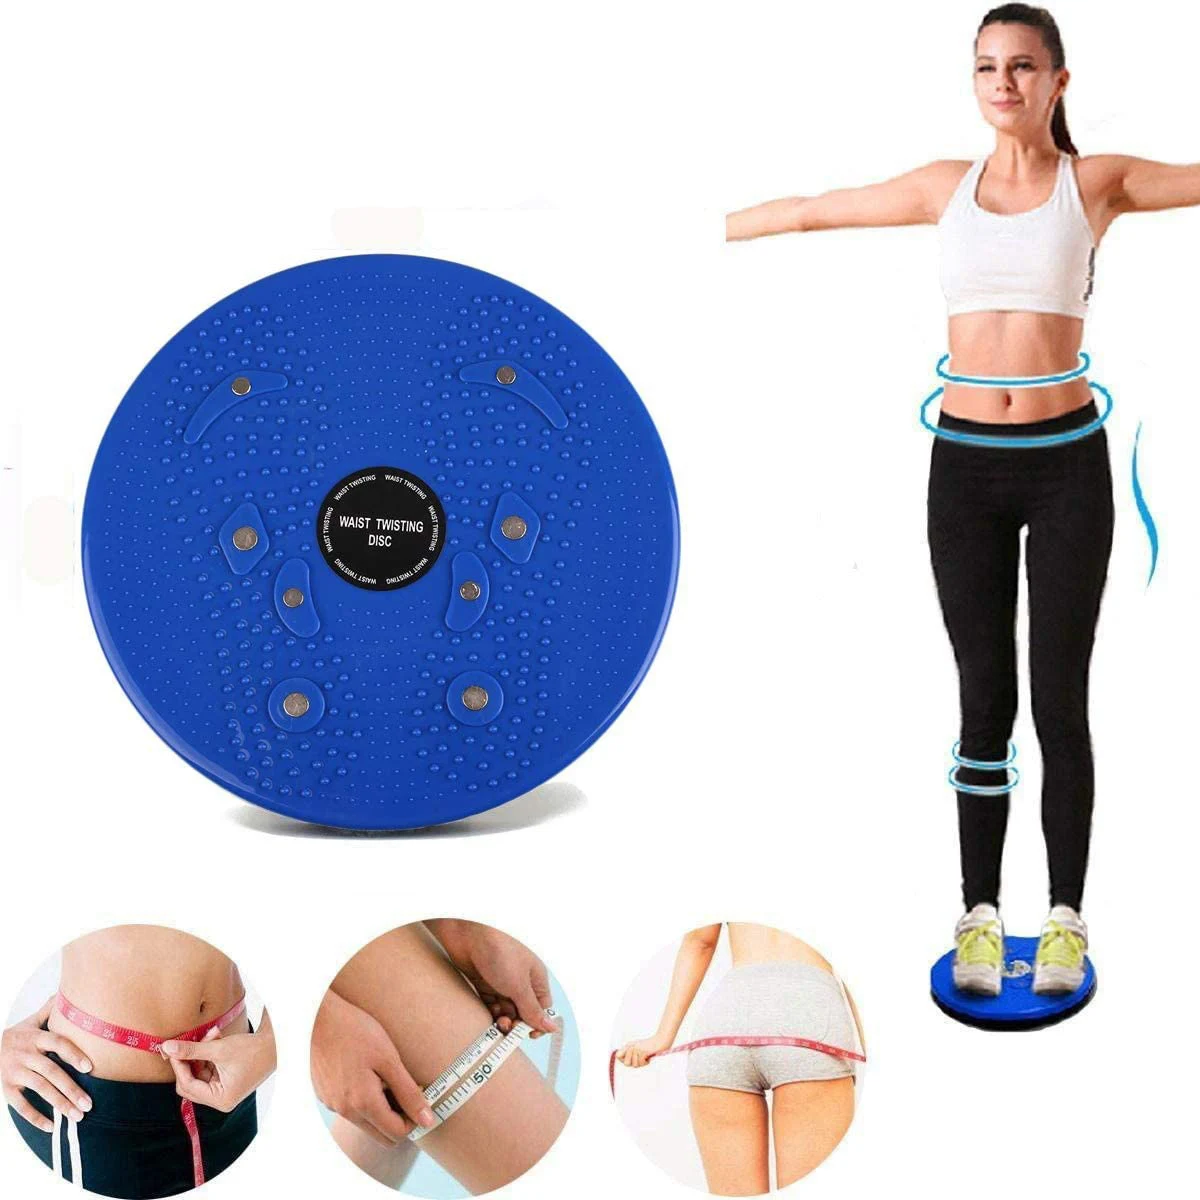 

Twist disk Magnetic Waist Wriggling plate slimming legs fitness Health thin waist exerciser Board